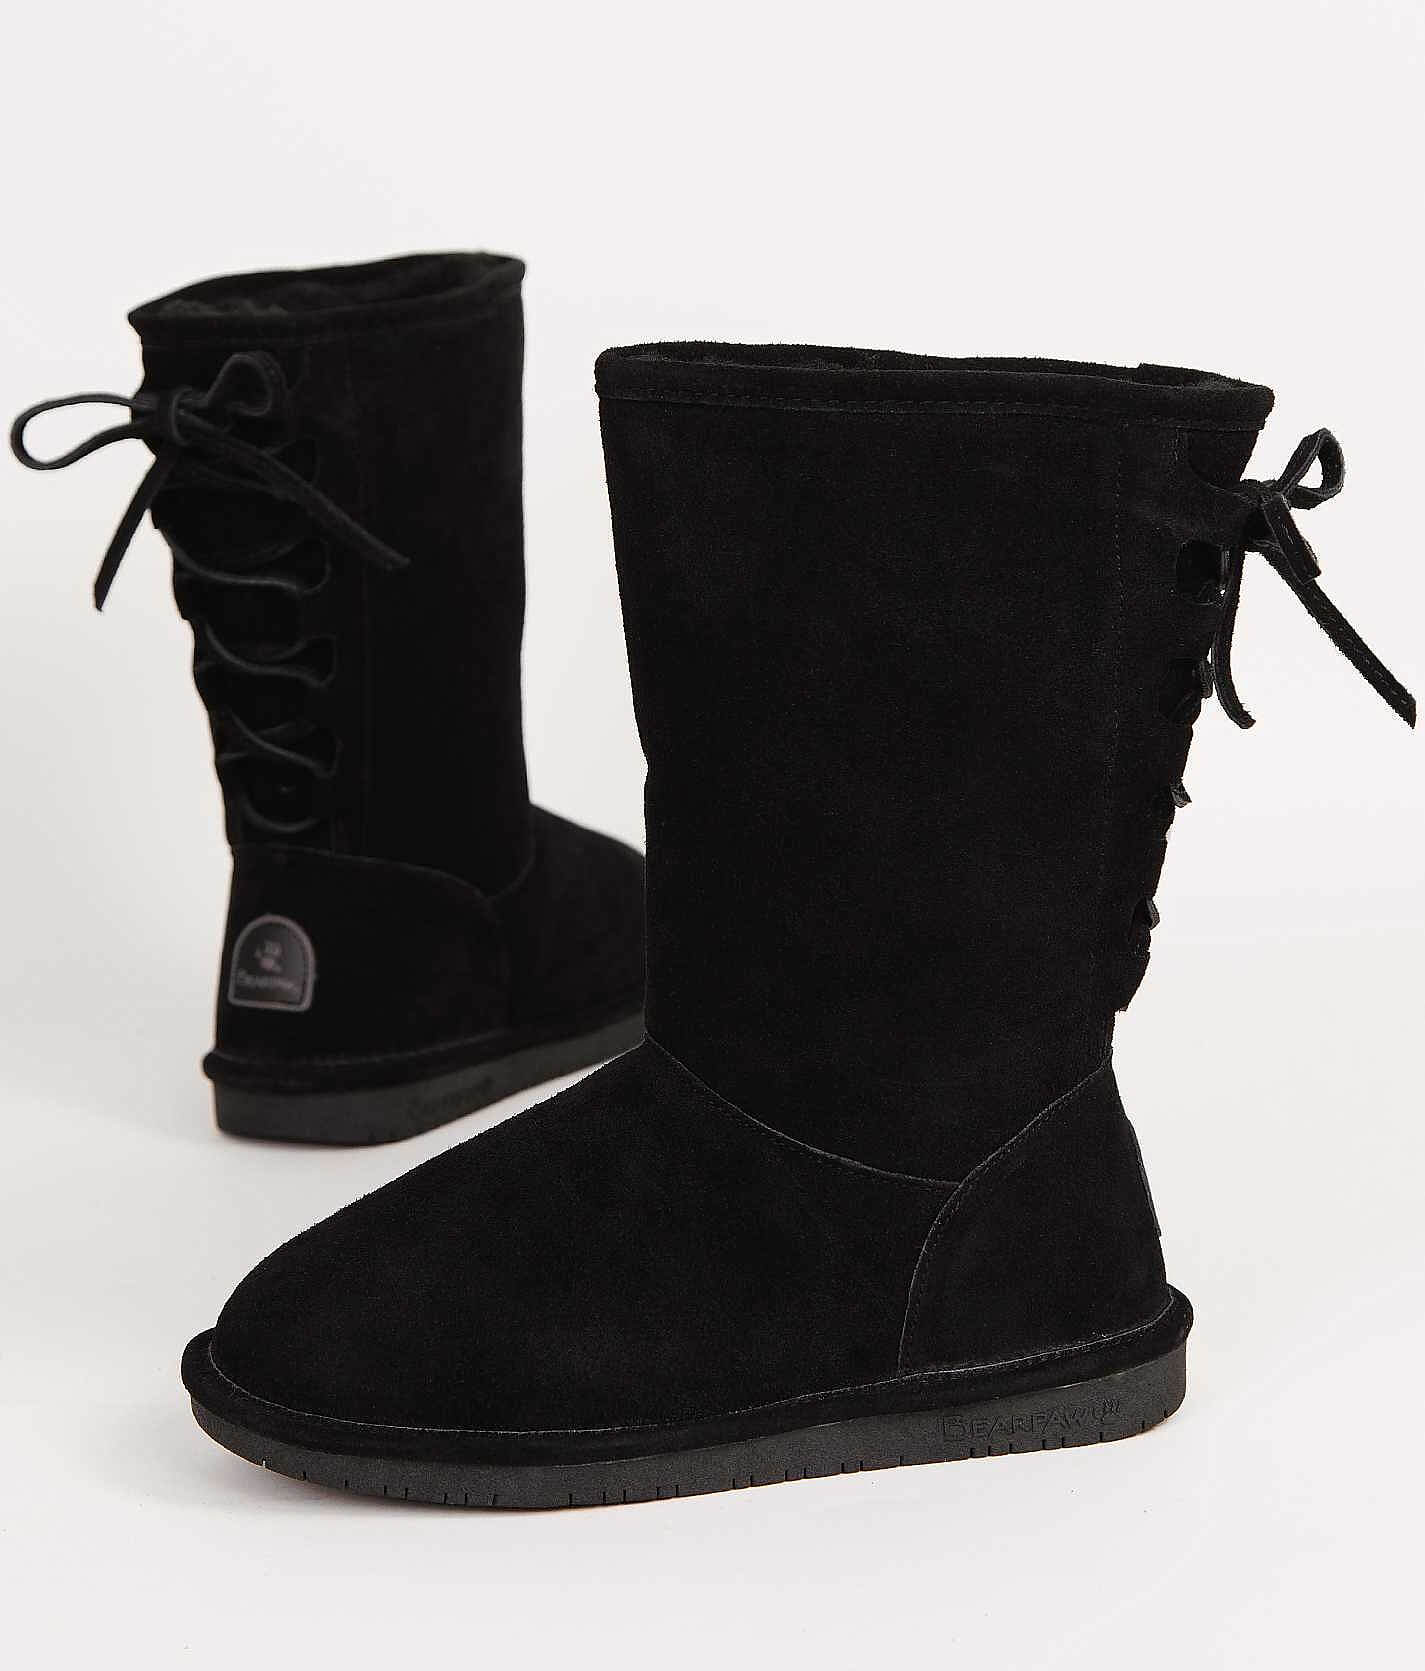 bearpaw boots with laces in back